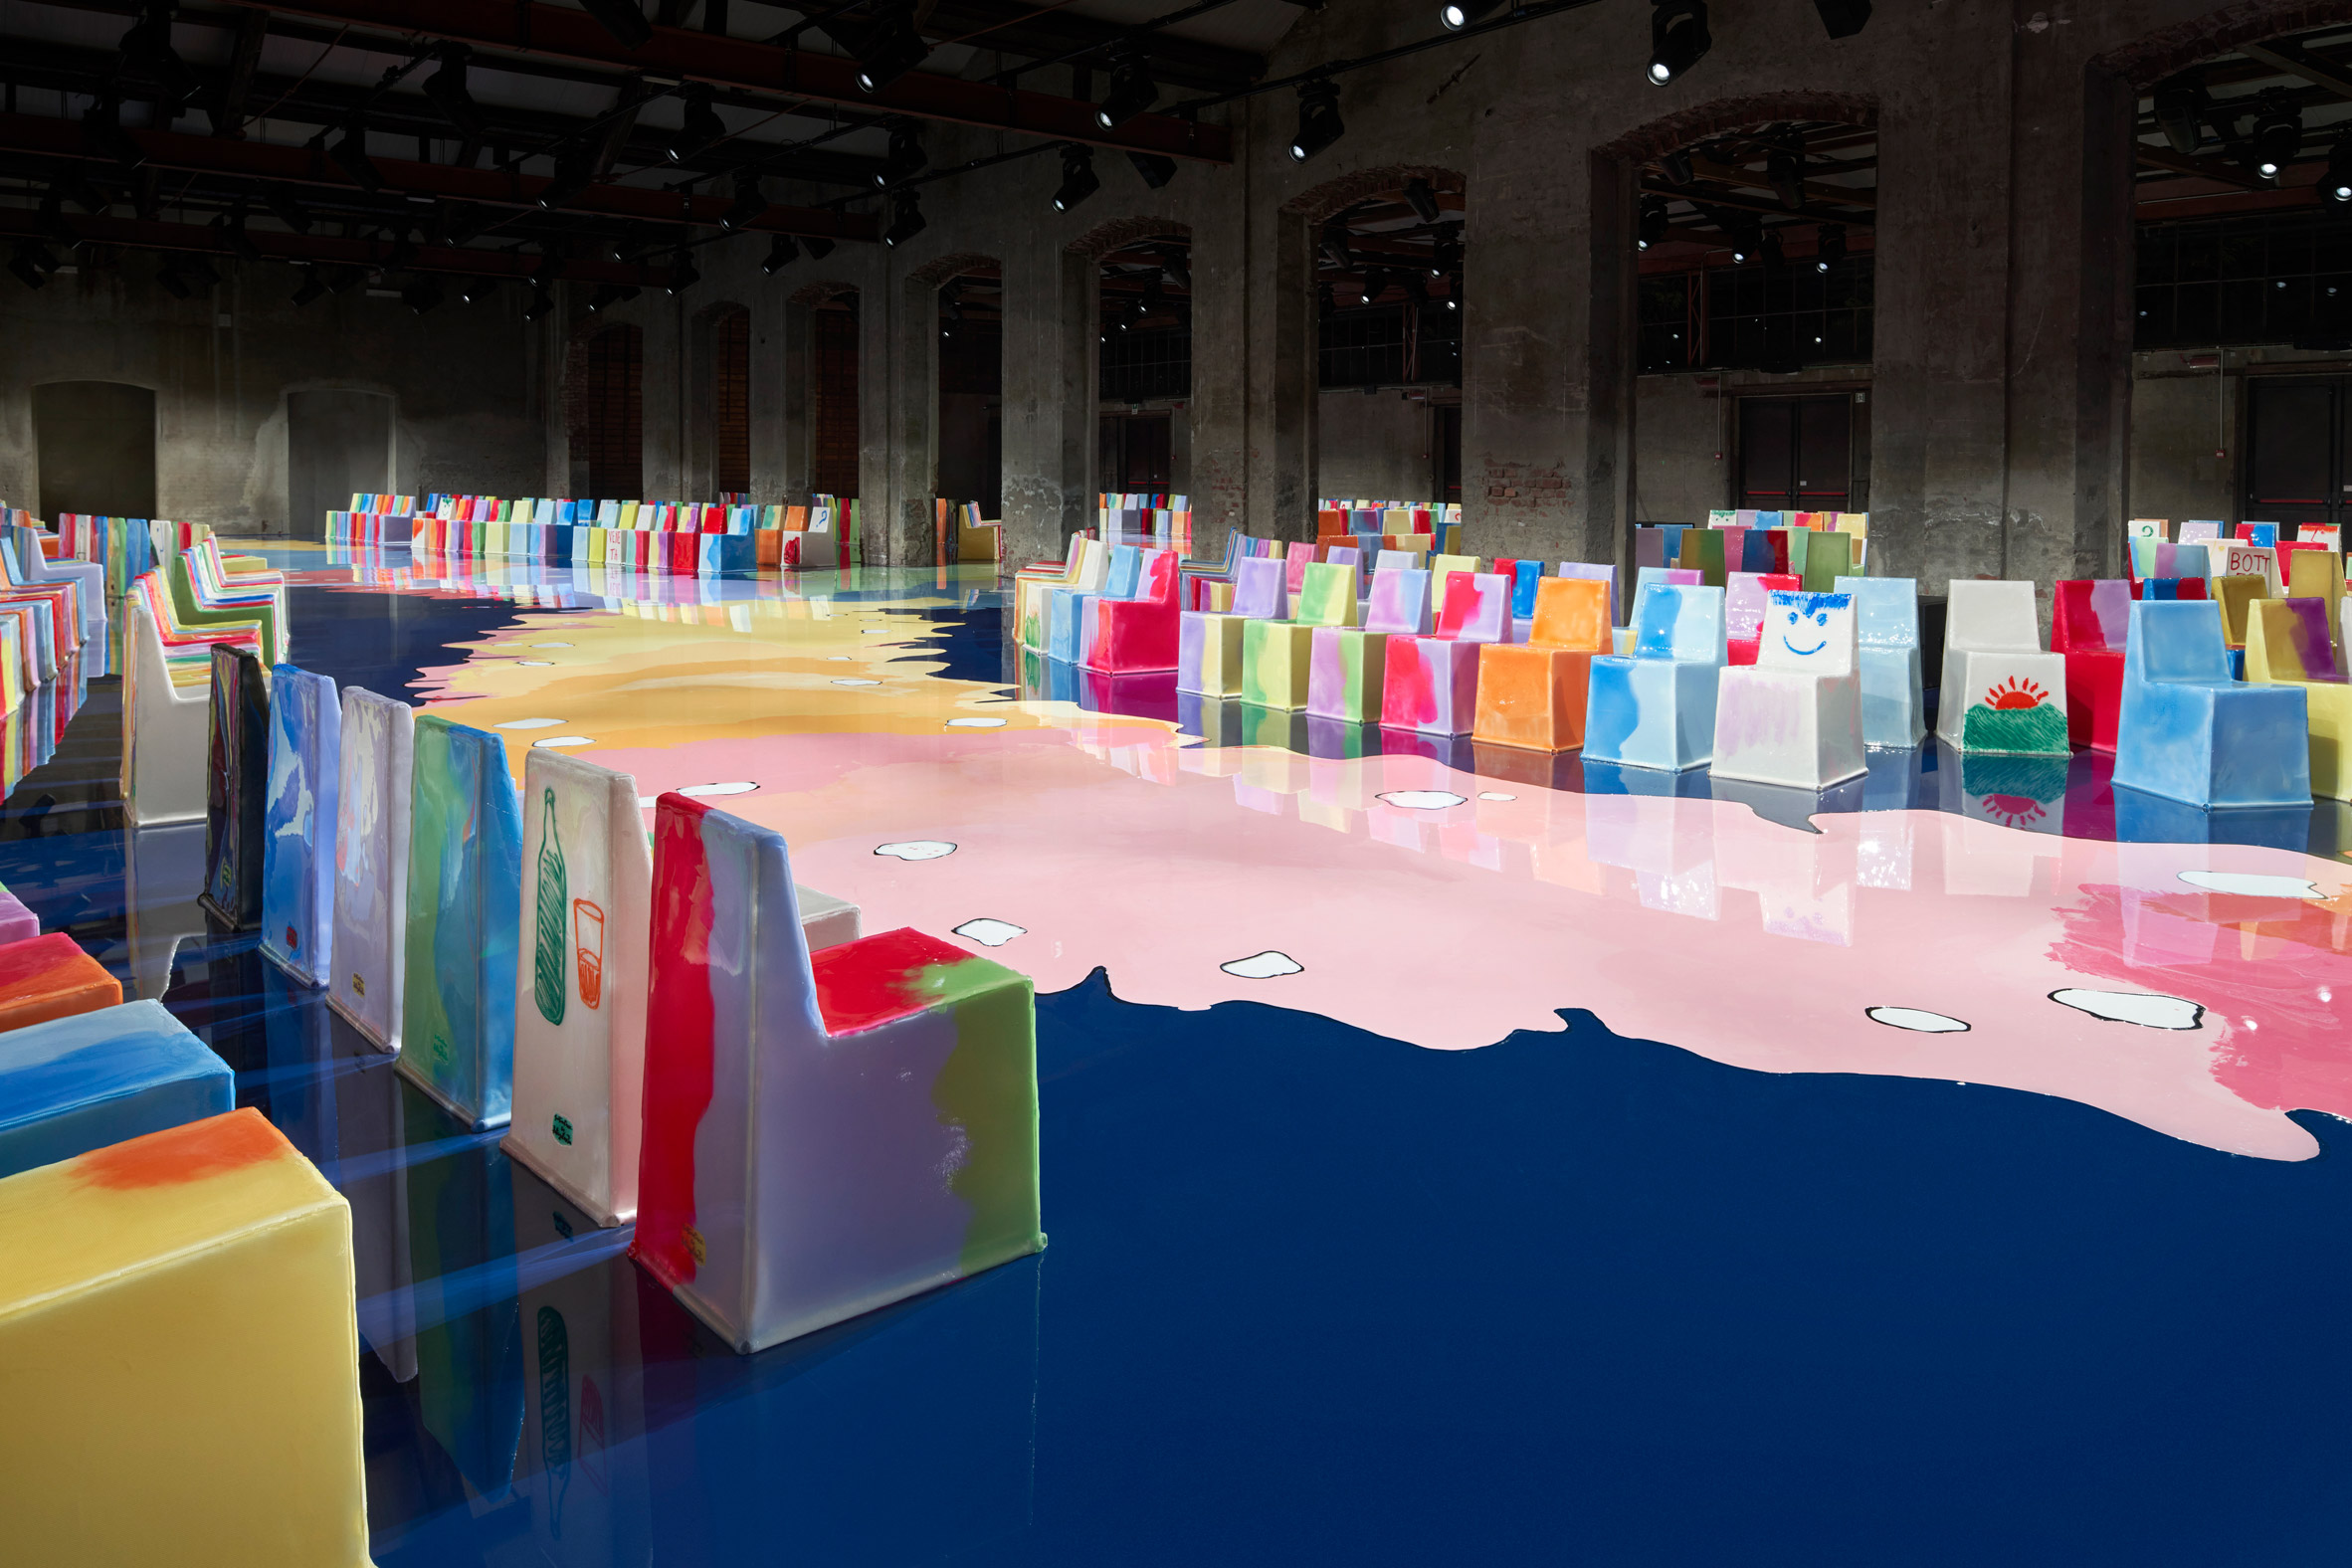 Image of the set at Bottega Veneta Spring Summer 2023 which was designed by Geatano Pesce